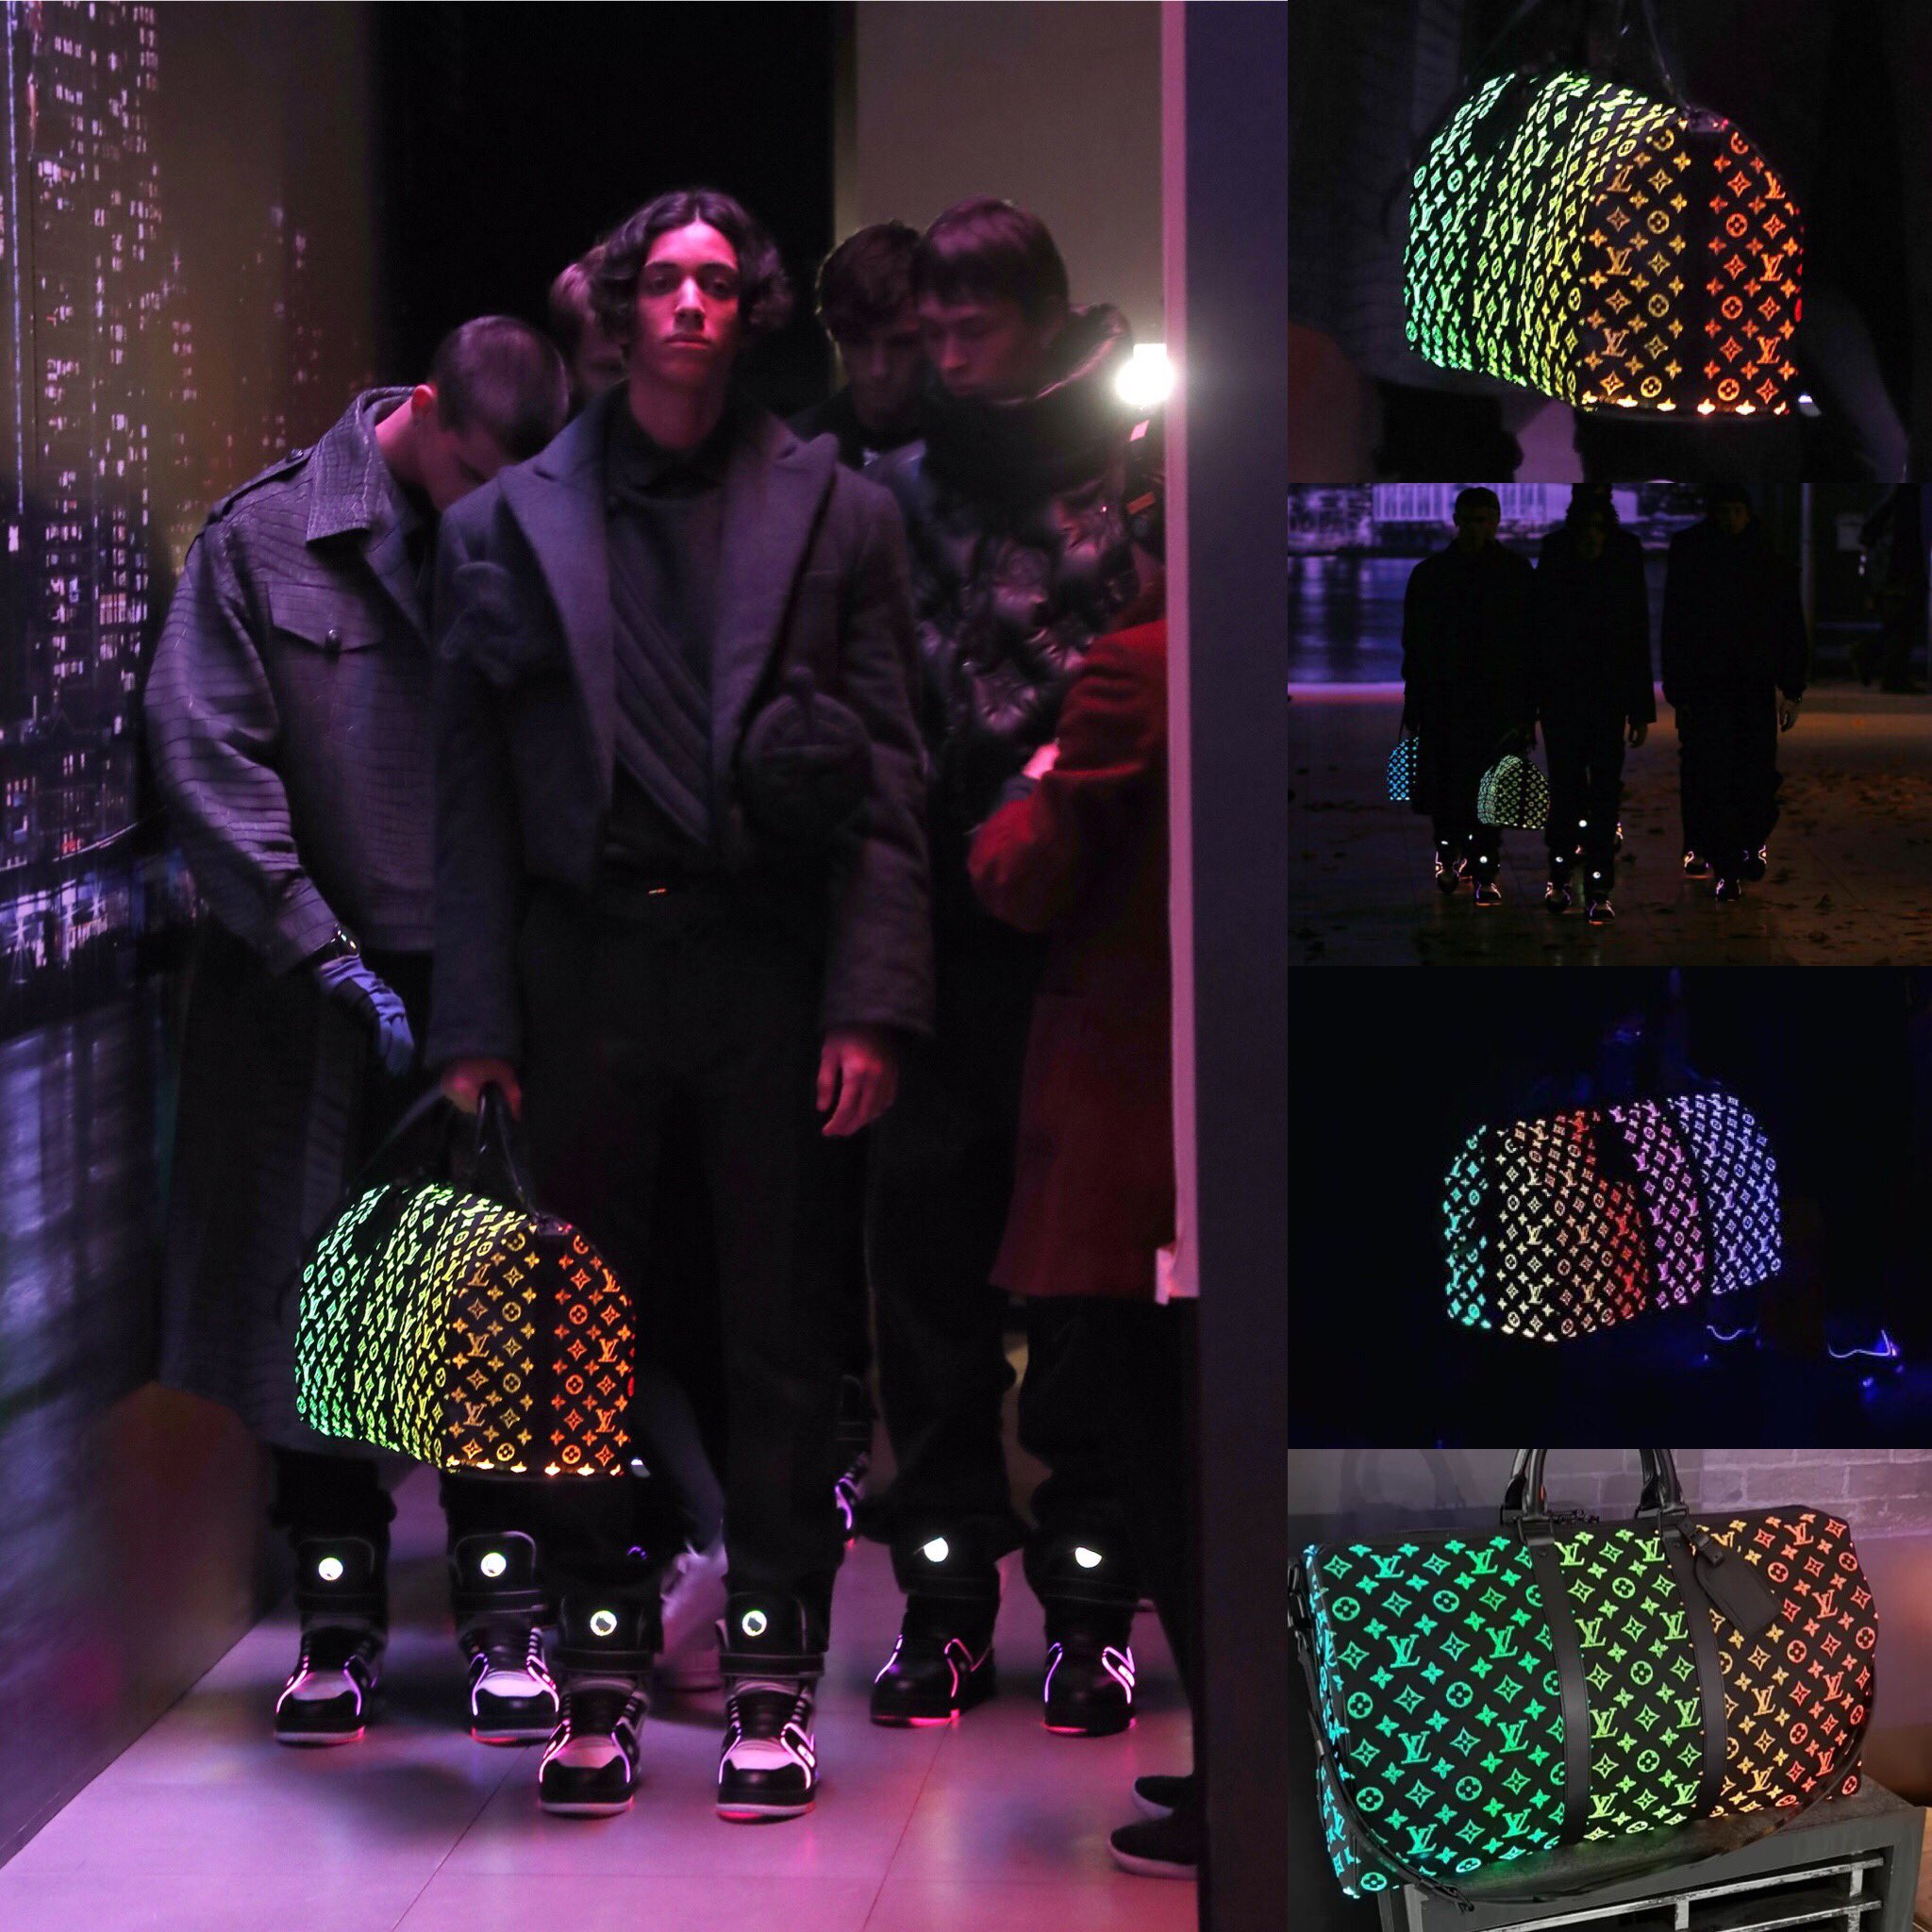 Personal Shopper on X: OMG Louis Vuitton just gave us something we didn't  know we needed: a glow-in-the-dark Louis Vuitton Monogram Duffel Bag. The  bags contain fiber optic lights. #louisvuitton #lv #virgilabloh #